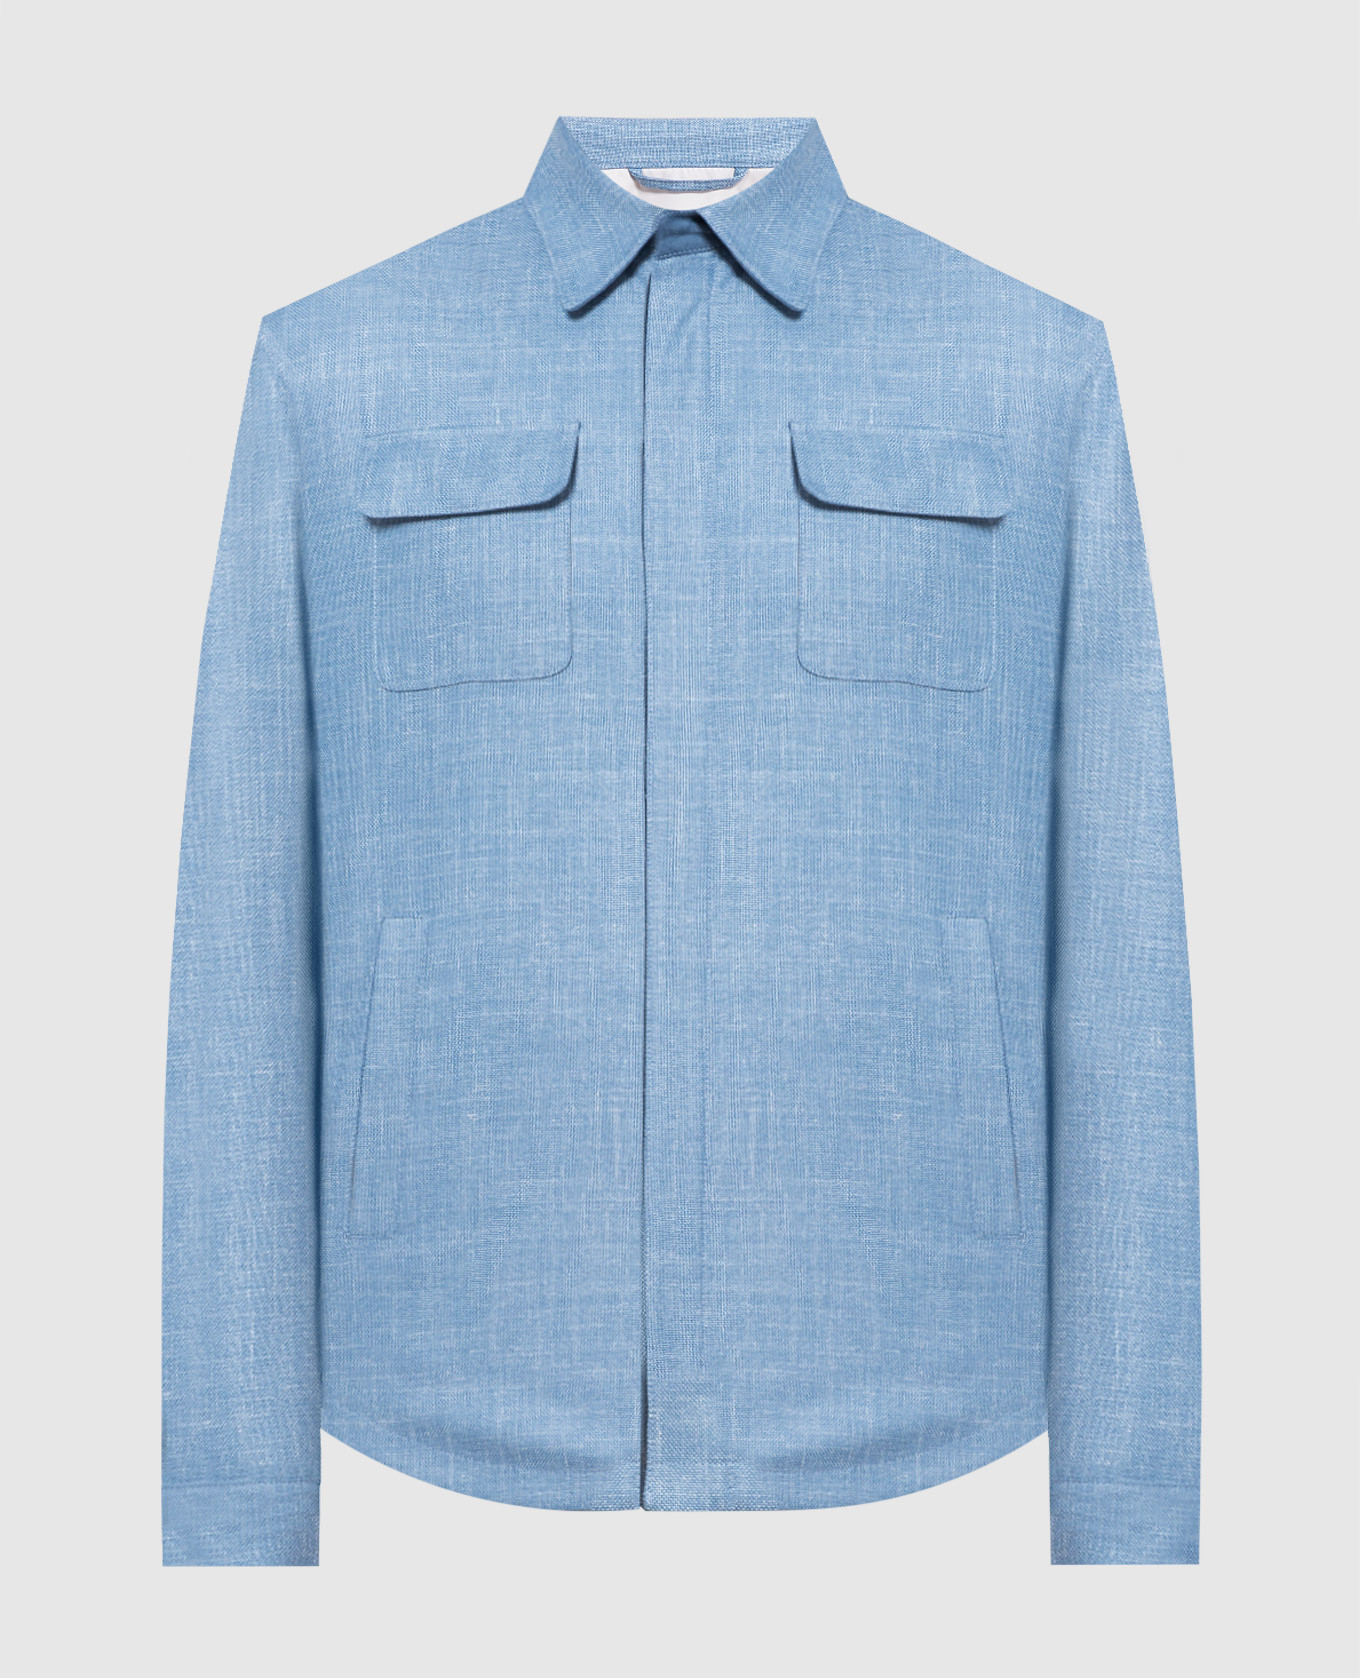 Blue jacket made of wool, silk and linen